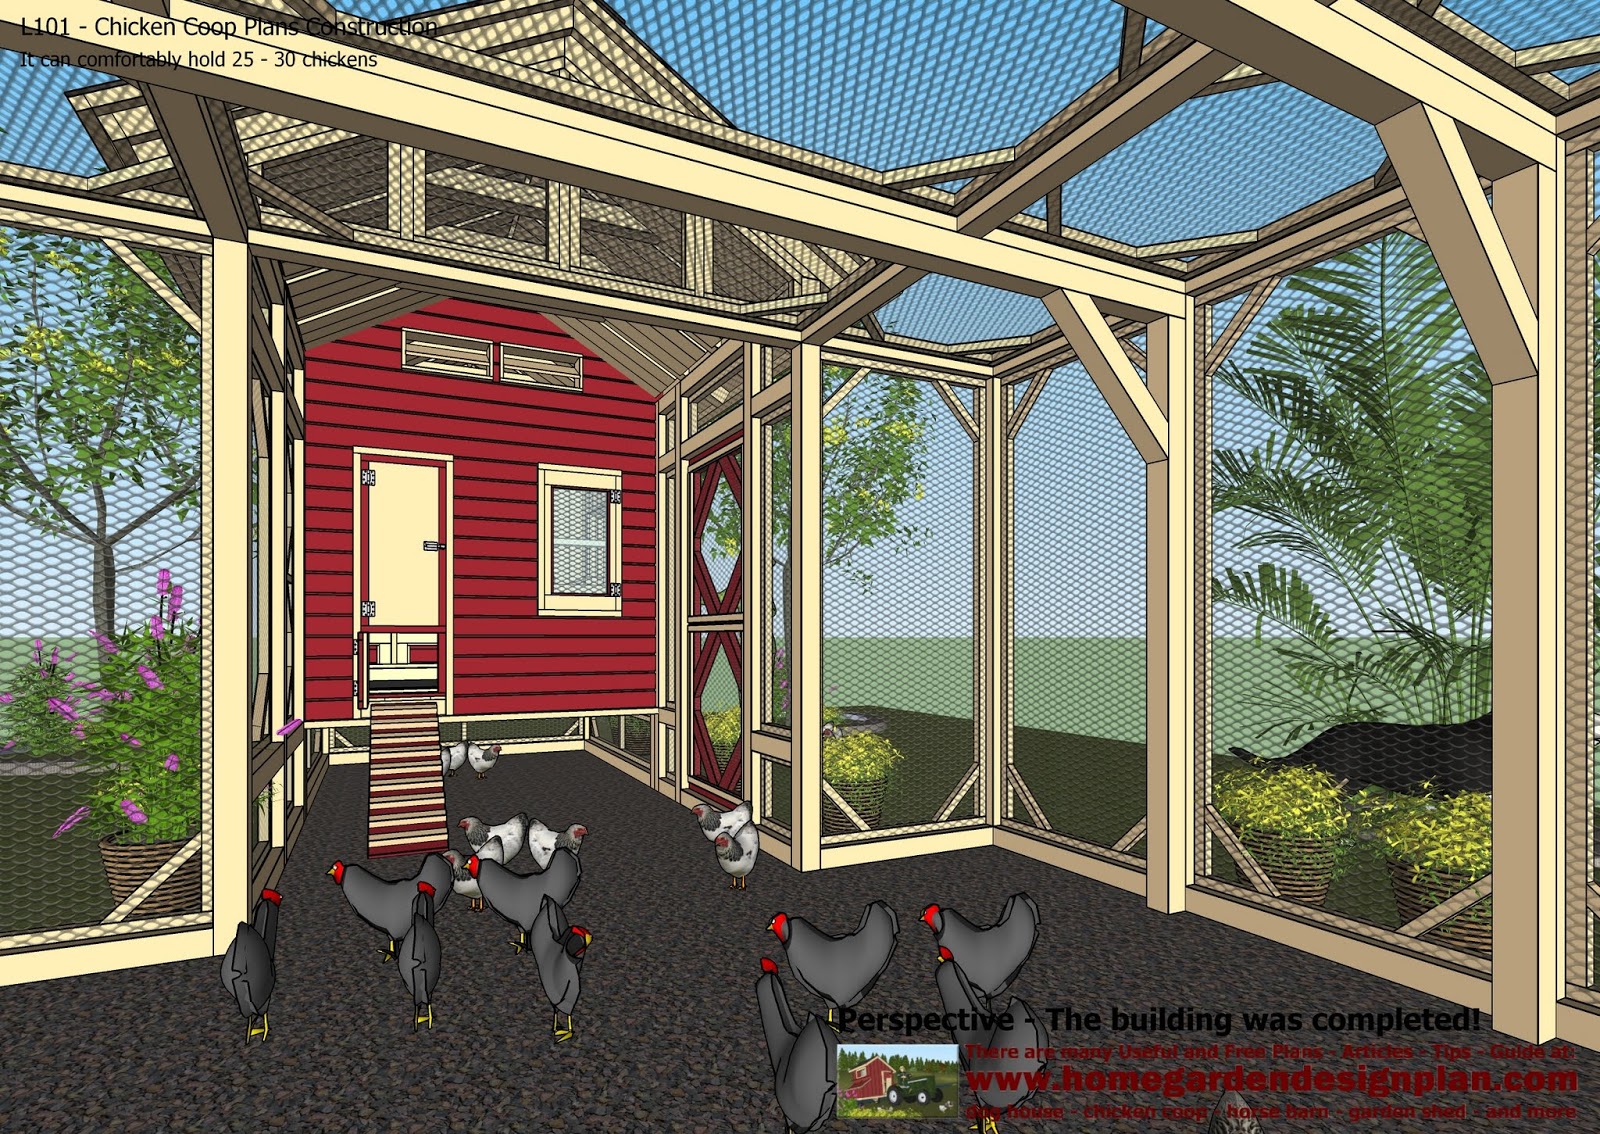  - Chicken Coop Design - How To Build An Insulated Chicken Coop